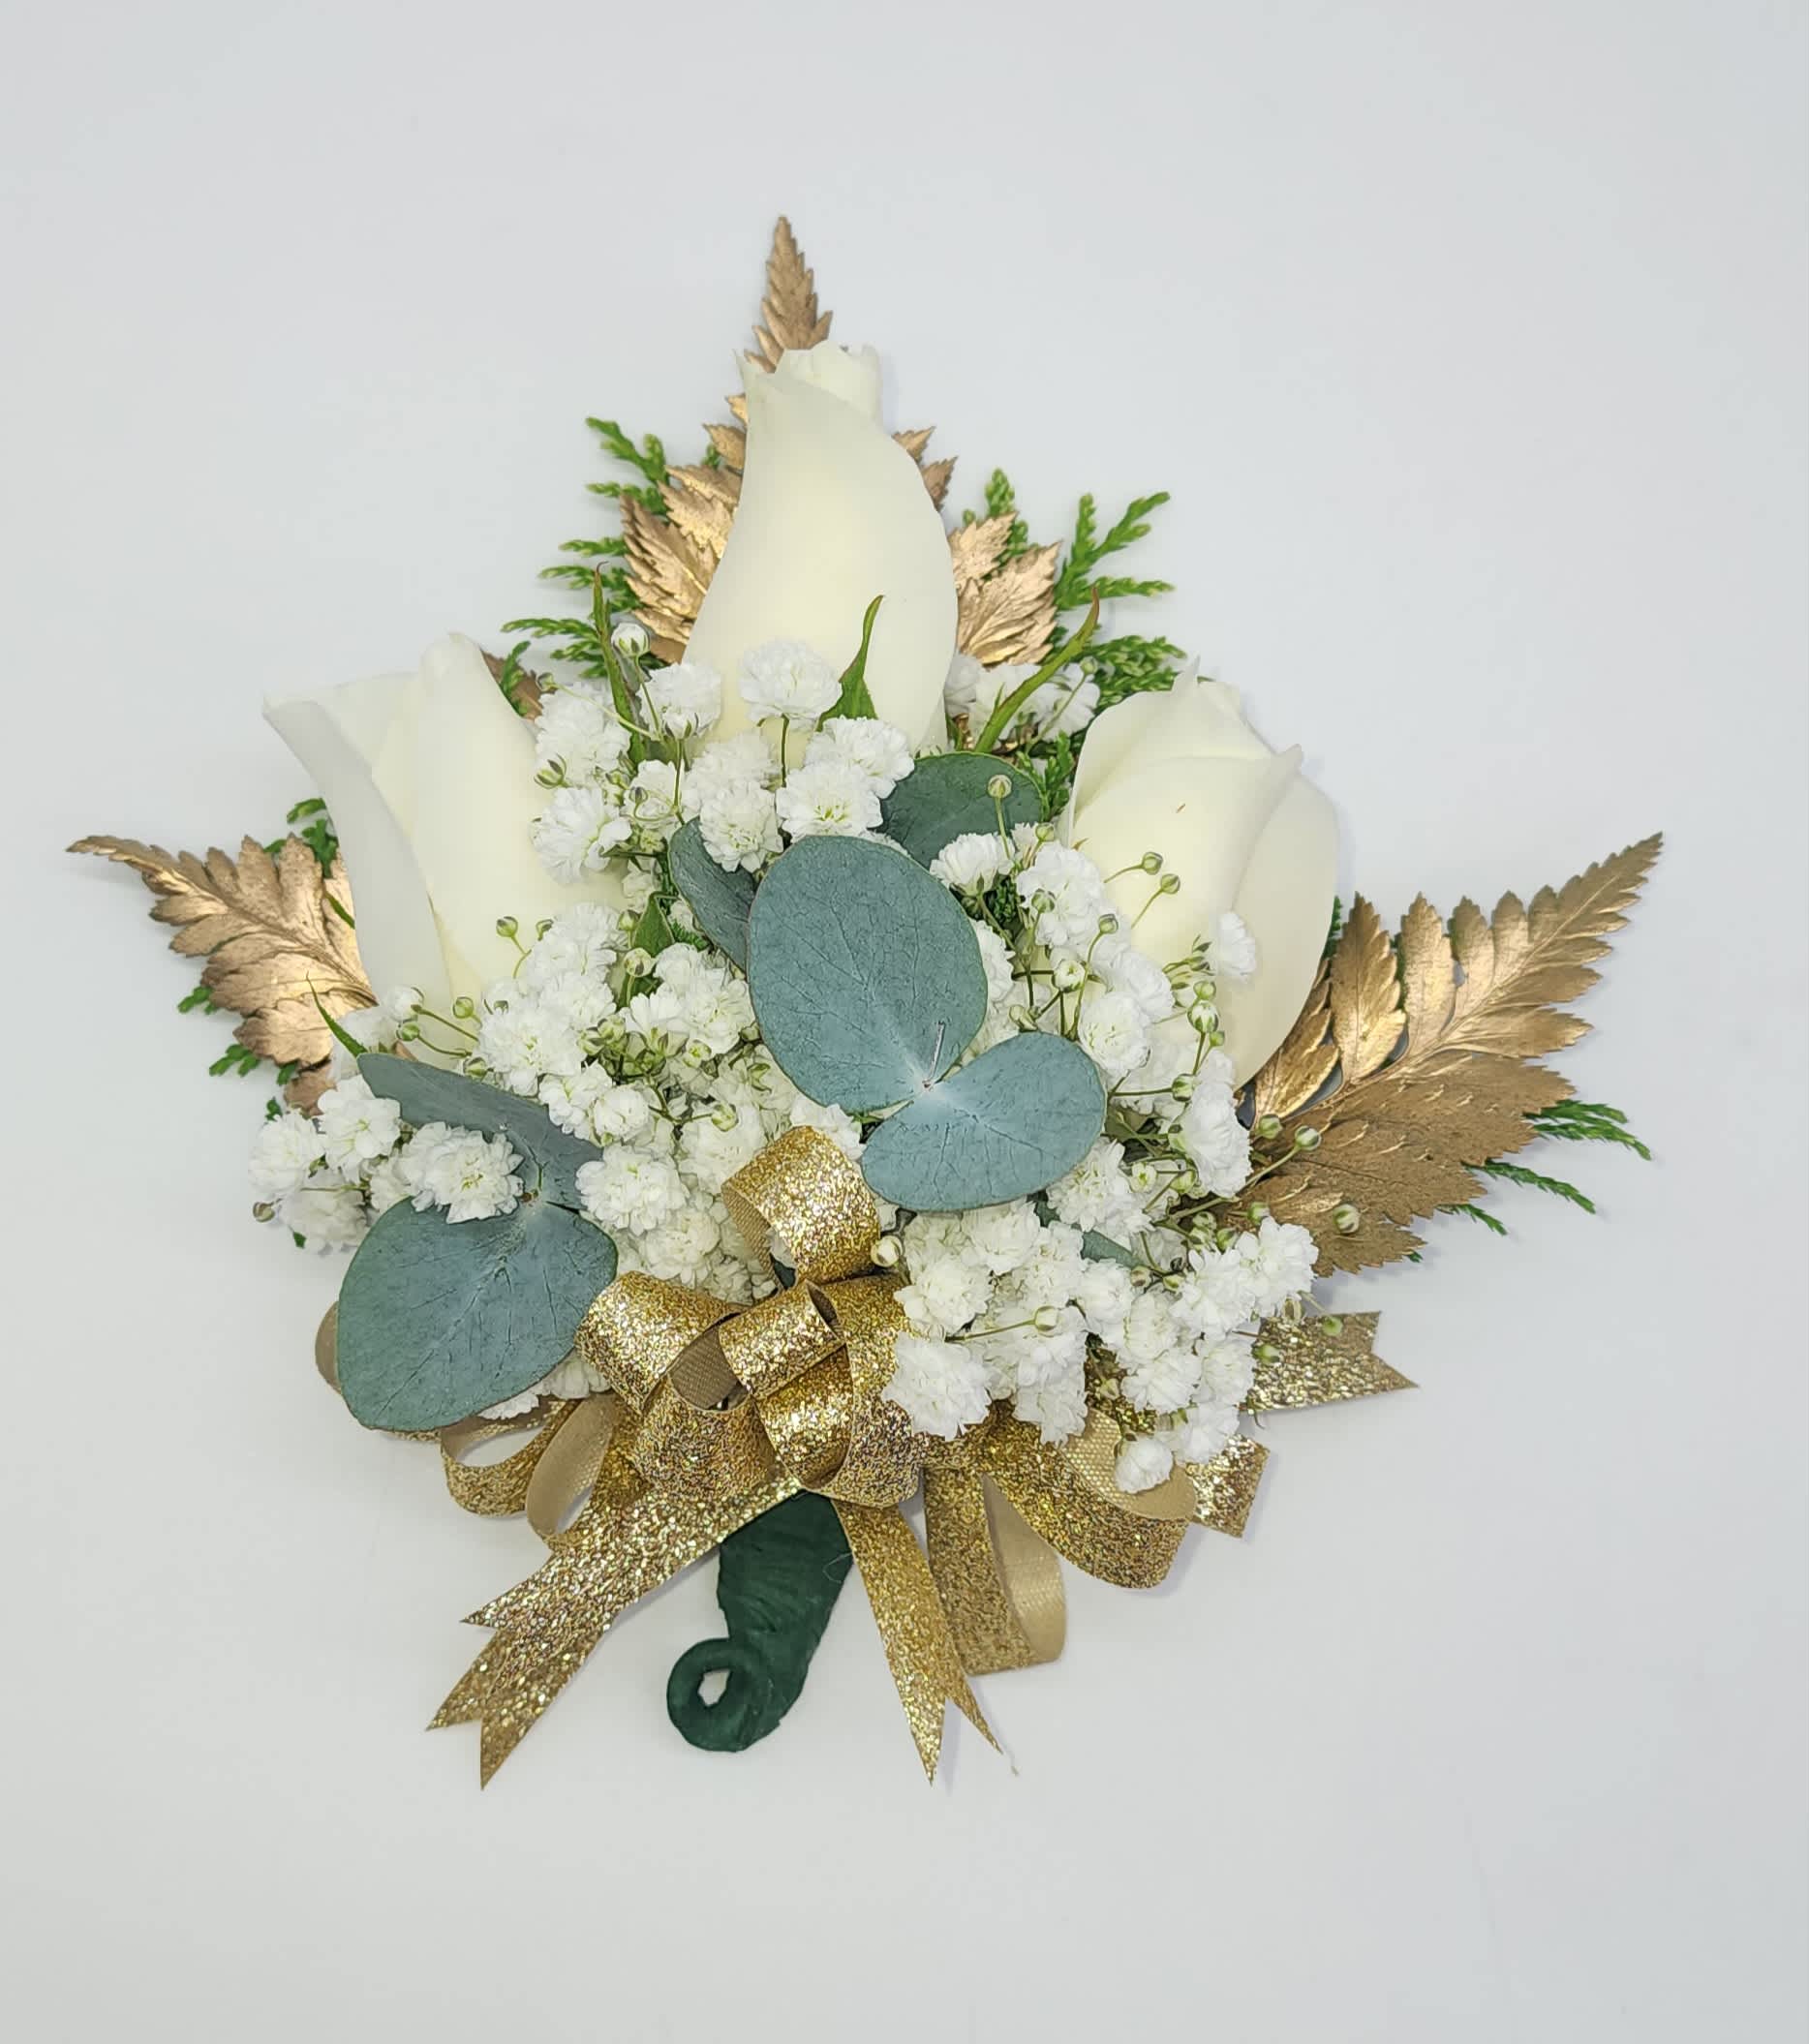 &quot;Golden Hour&quot; Wrist Corsage  - Designers Choice Customized Wrist Corsage with Golden accents!